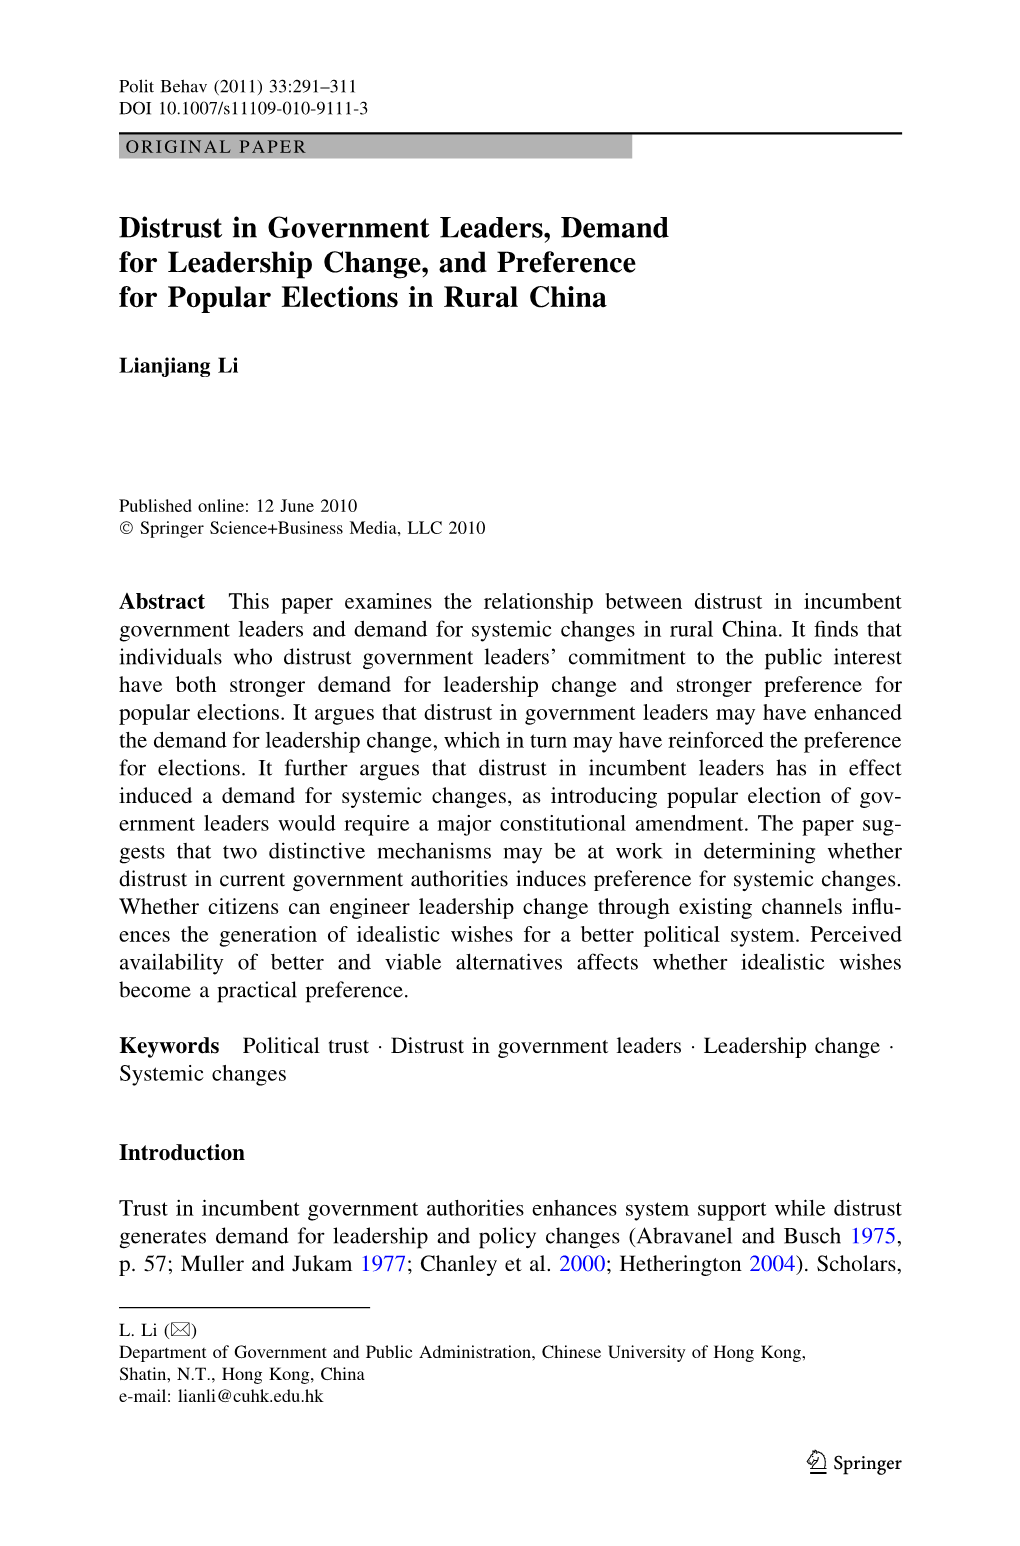 Distrust in Government Leaders, Demand for Leadership Change, and Preference for Popular Elections in Rural China